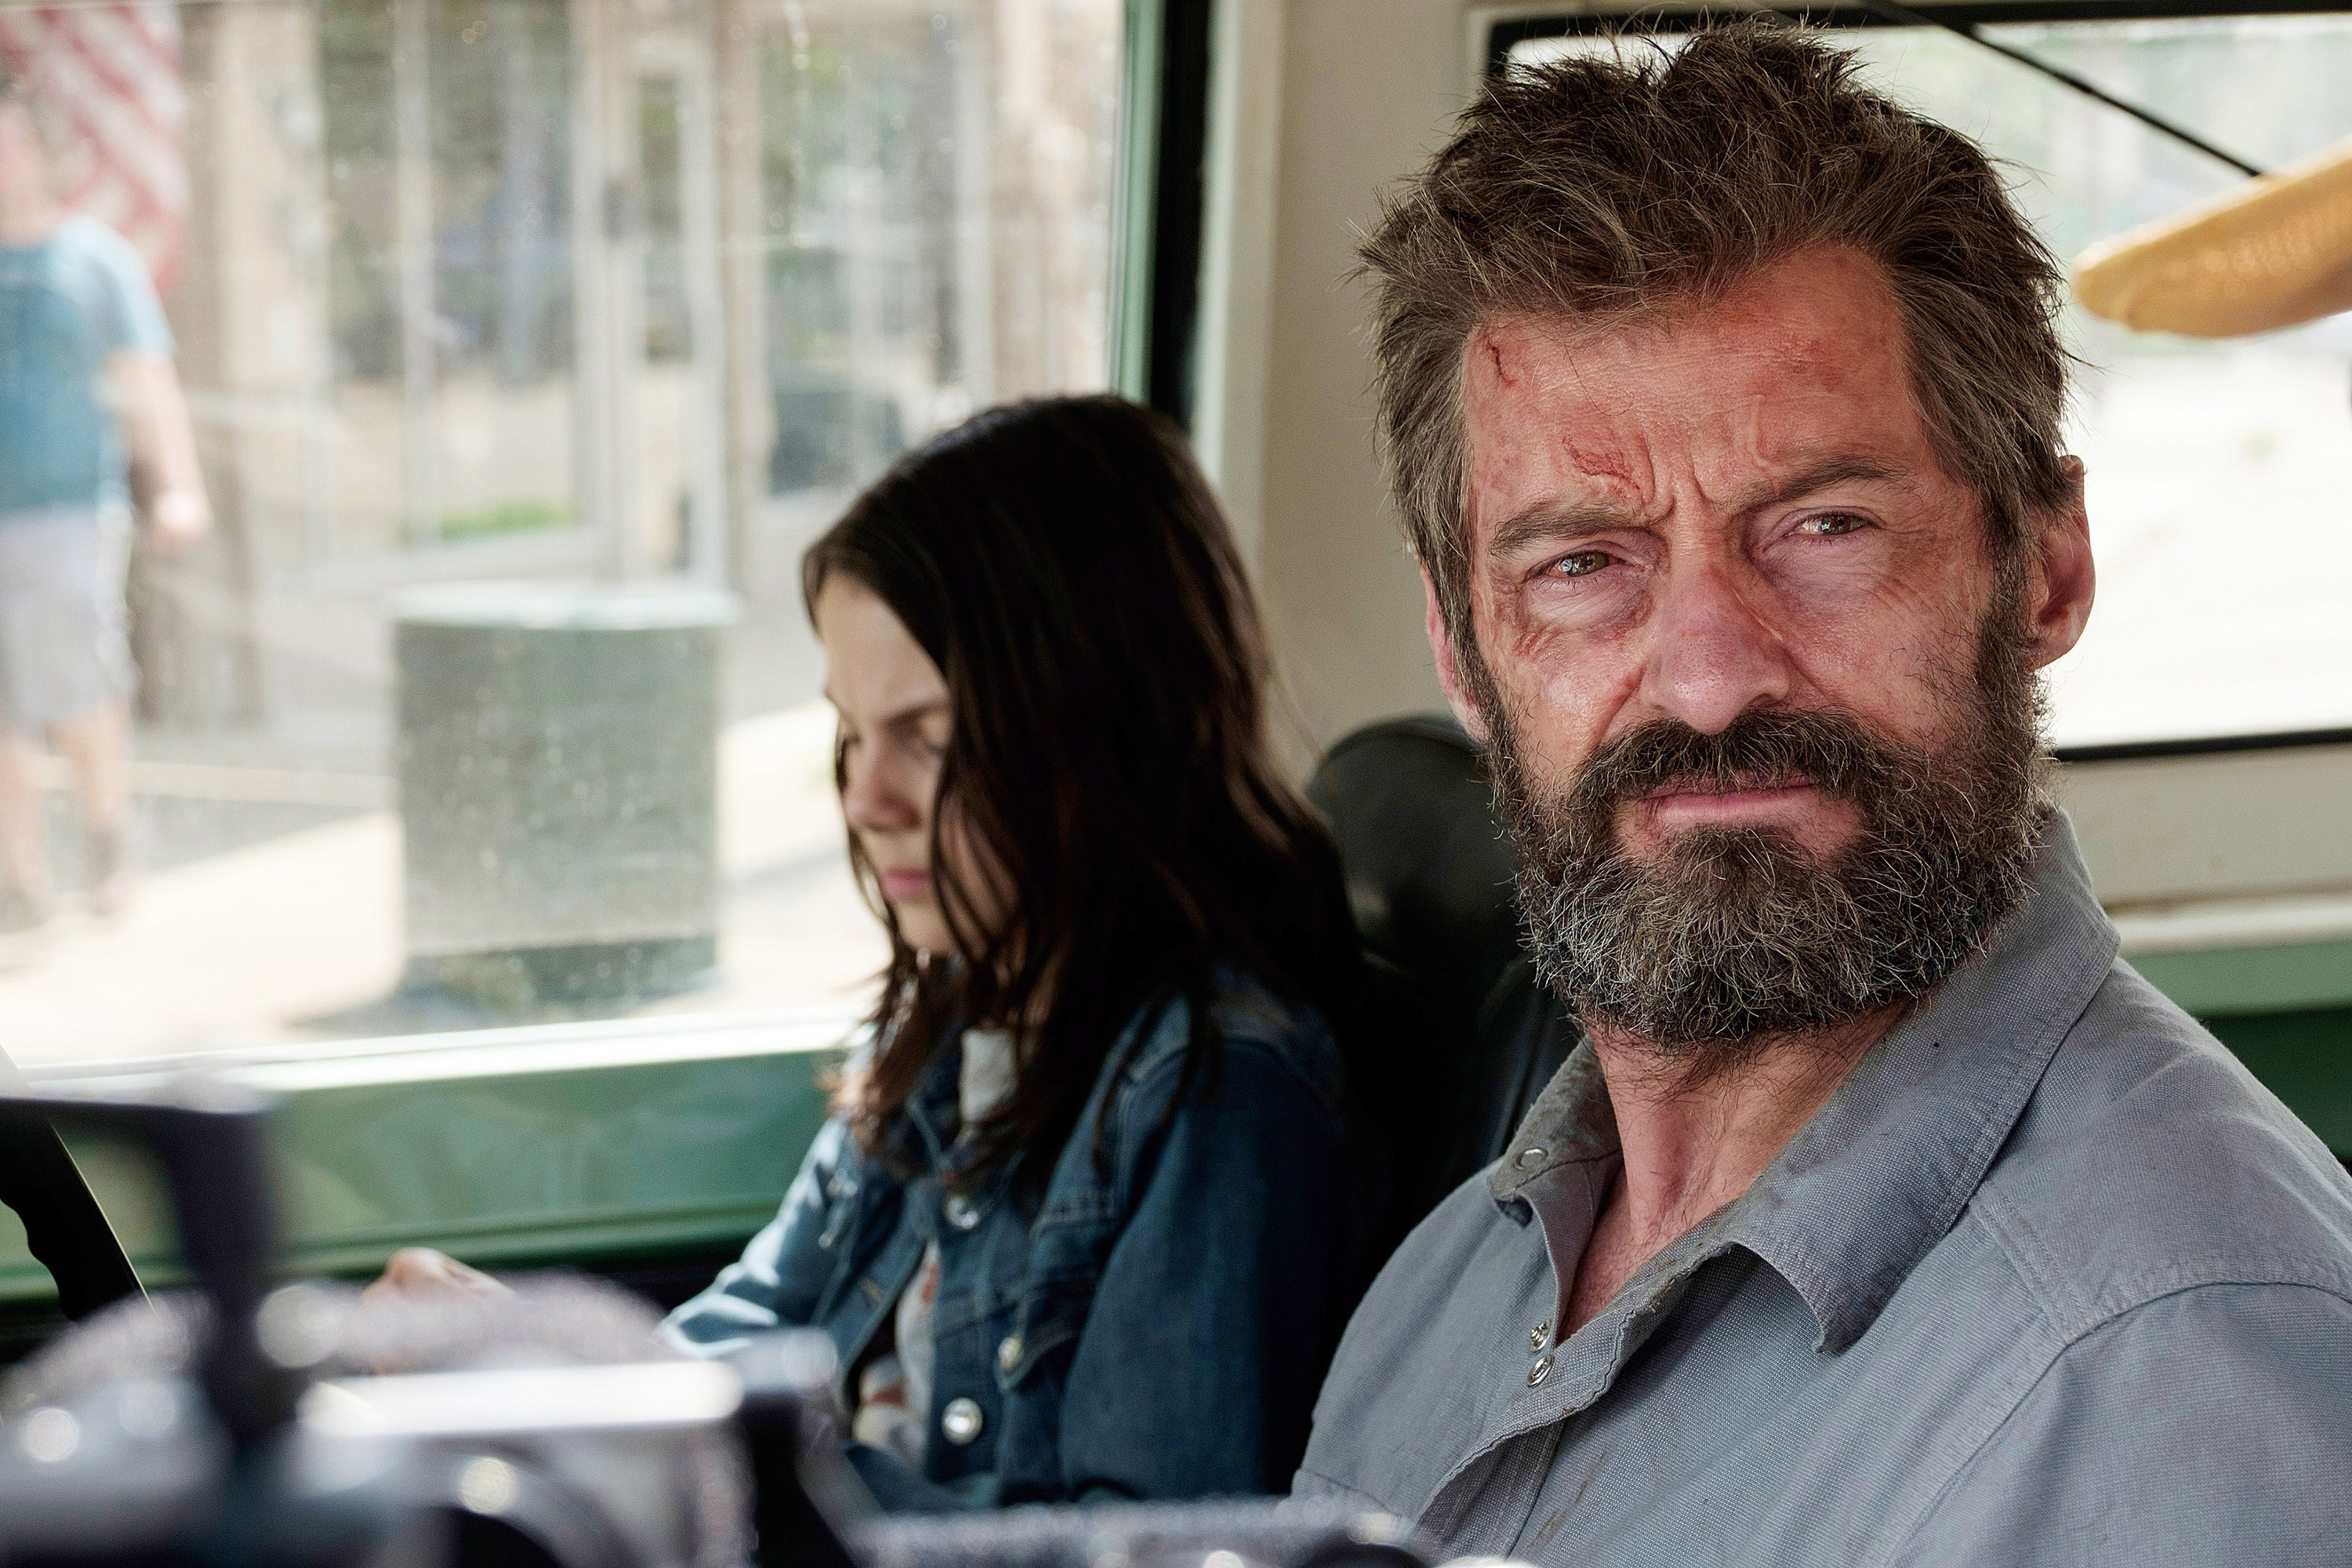 Laura and Wolverine sitting together in Logan movie